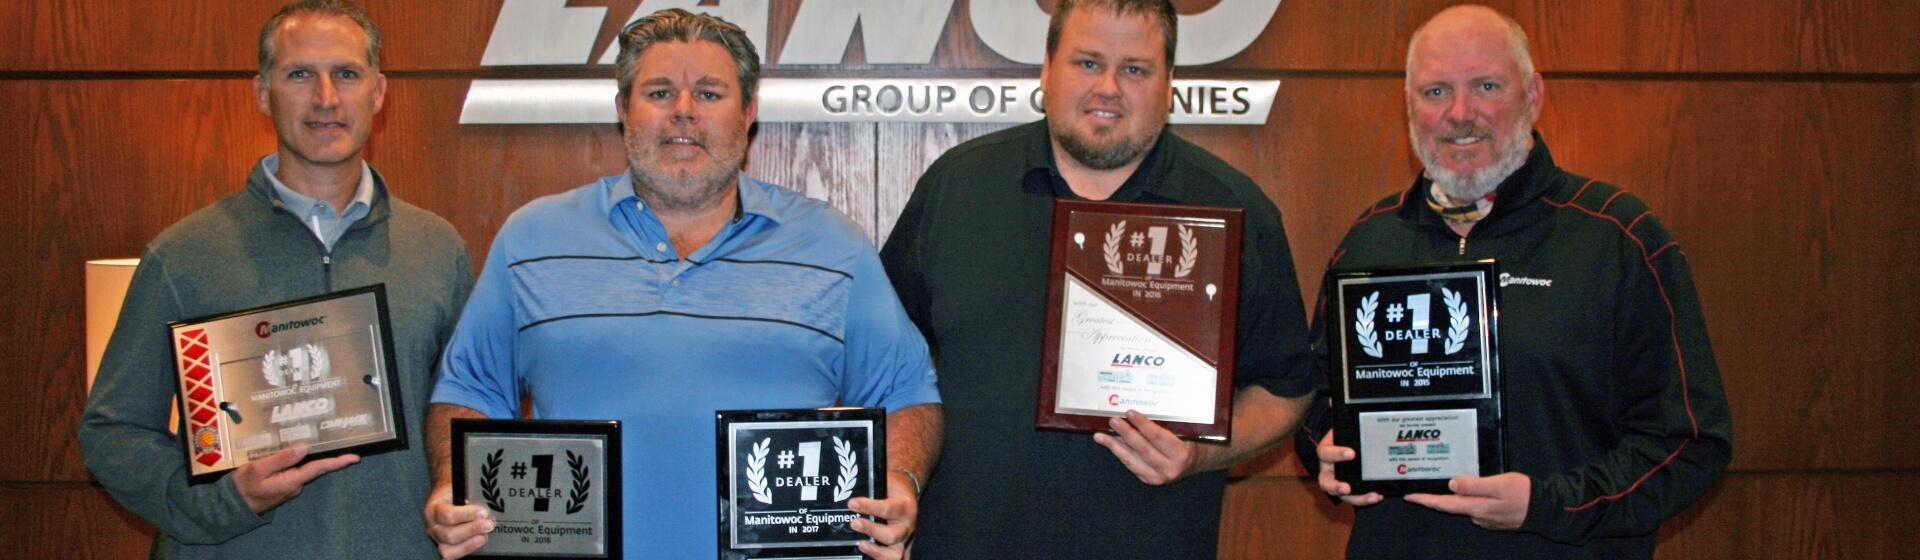 Manitowoc-awards-Lanco-Group-of-Companies-as-Top-Dealer-of-the-Year.jpg